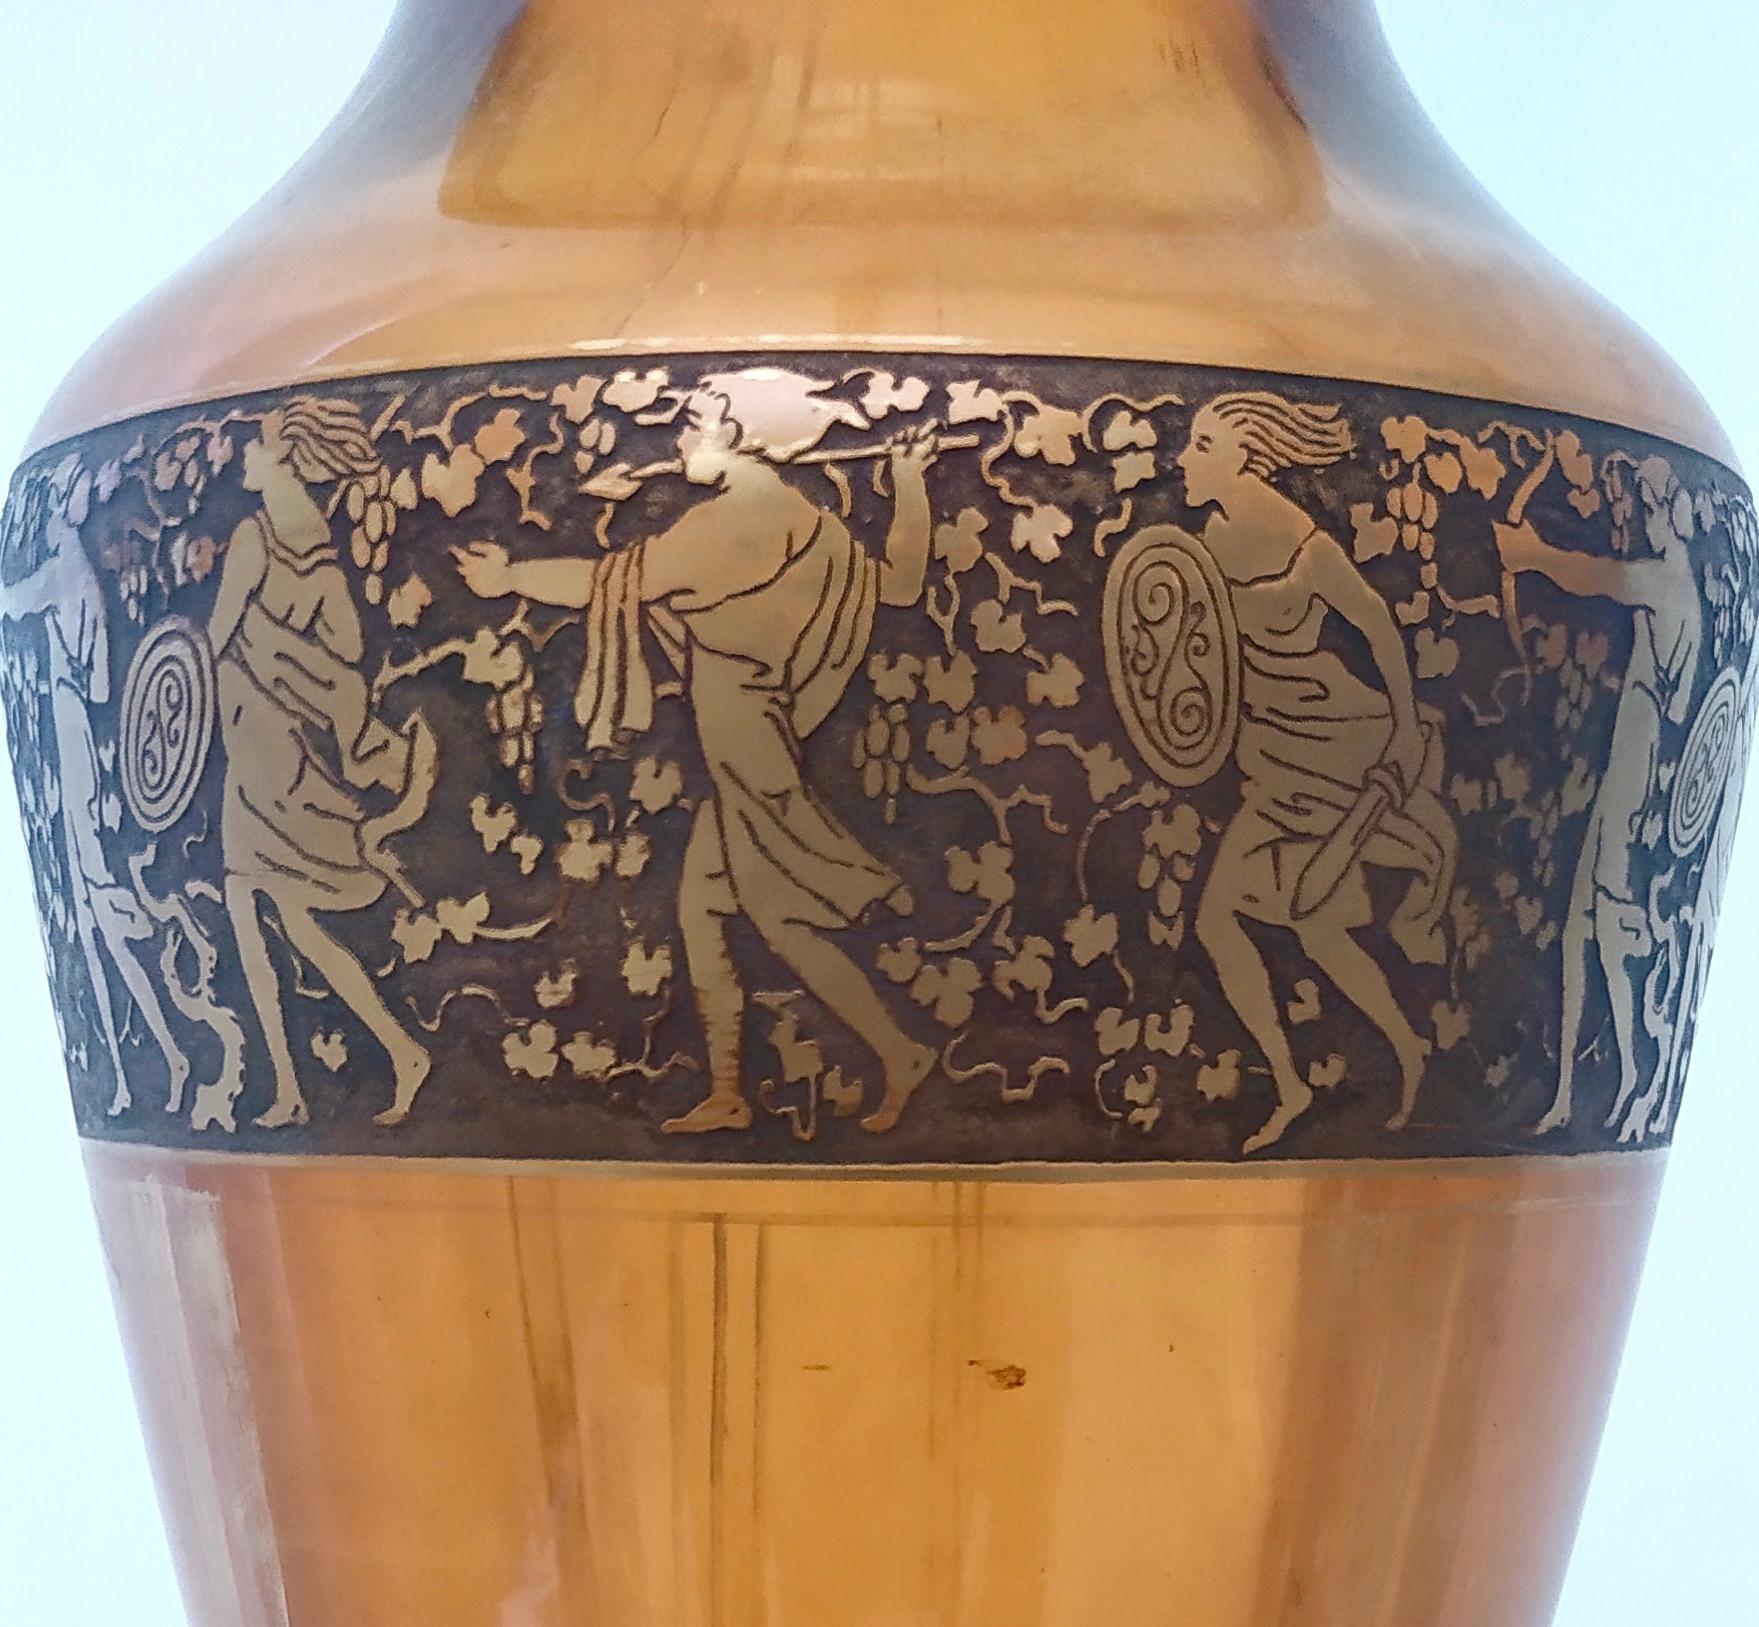 Early 20th Century Vintage Amber Glass Vase by Moser Karlsbad with Gold Mythological Motives